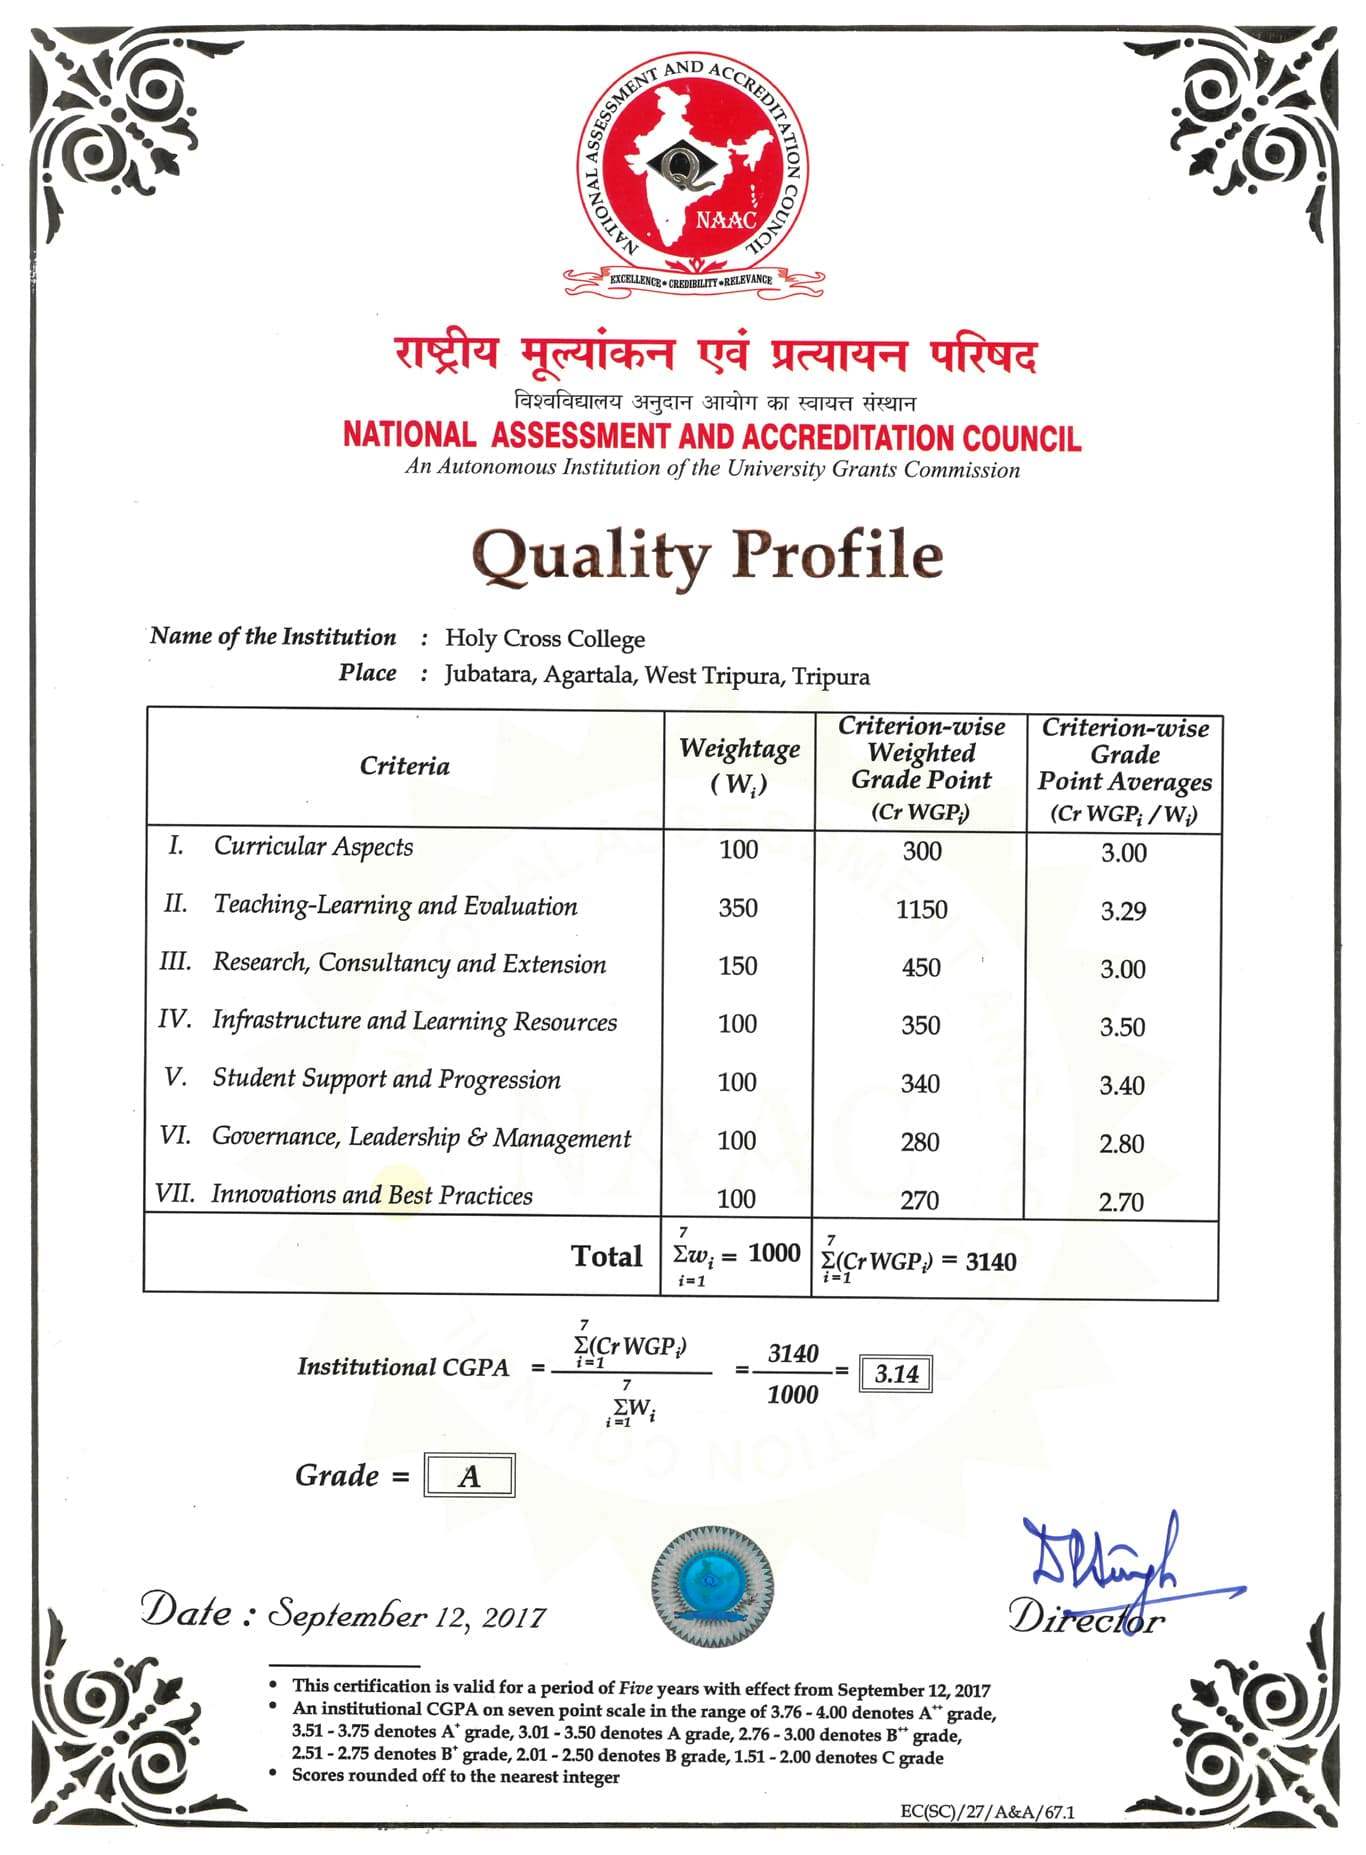 Holy Cross College NAAC Certificate